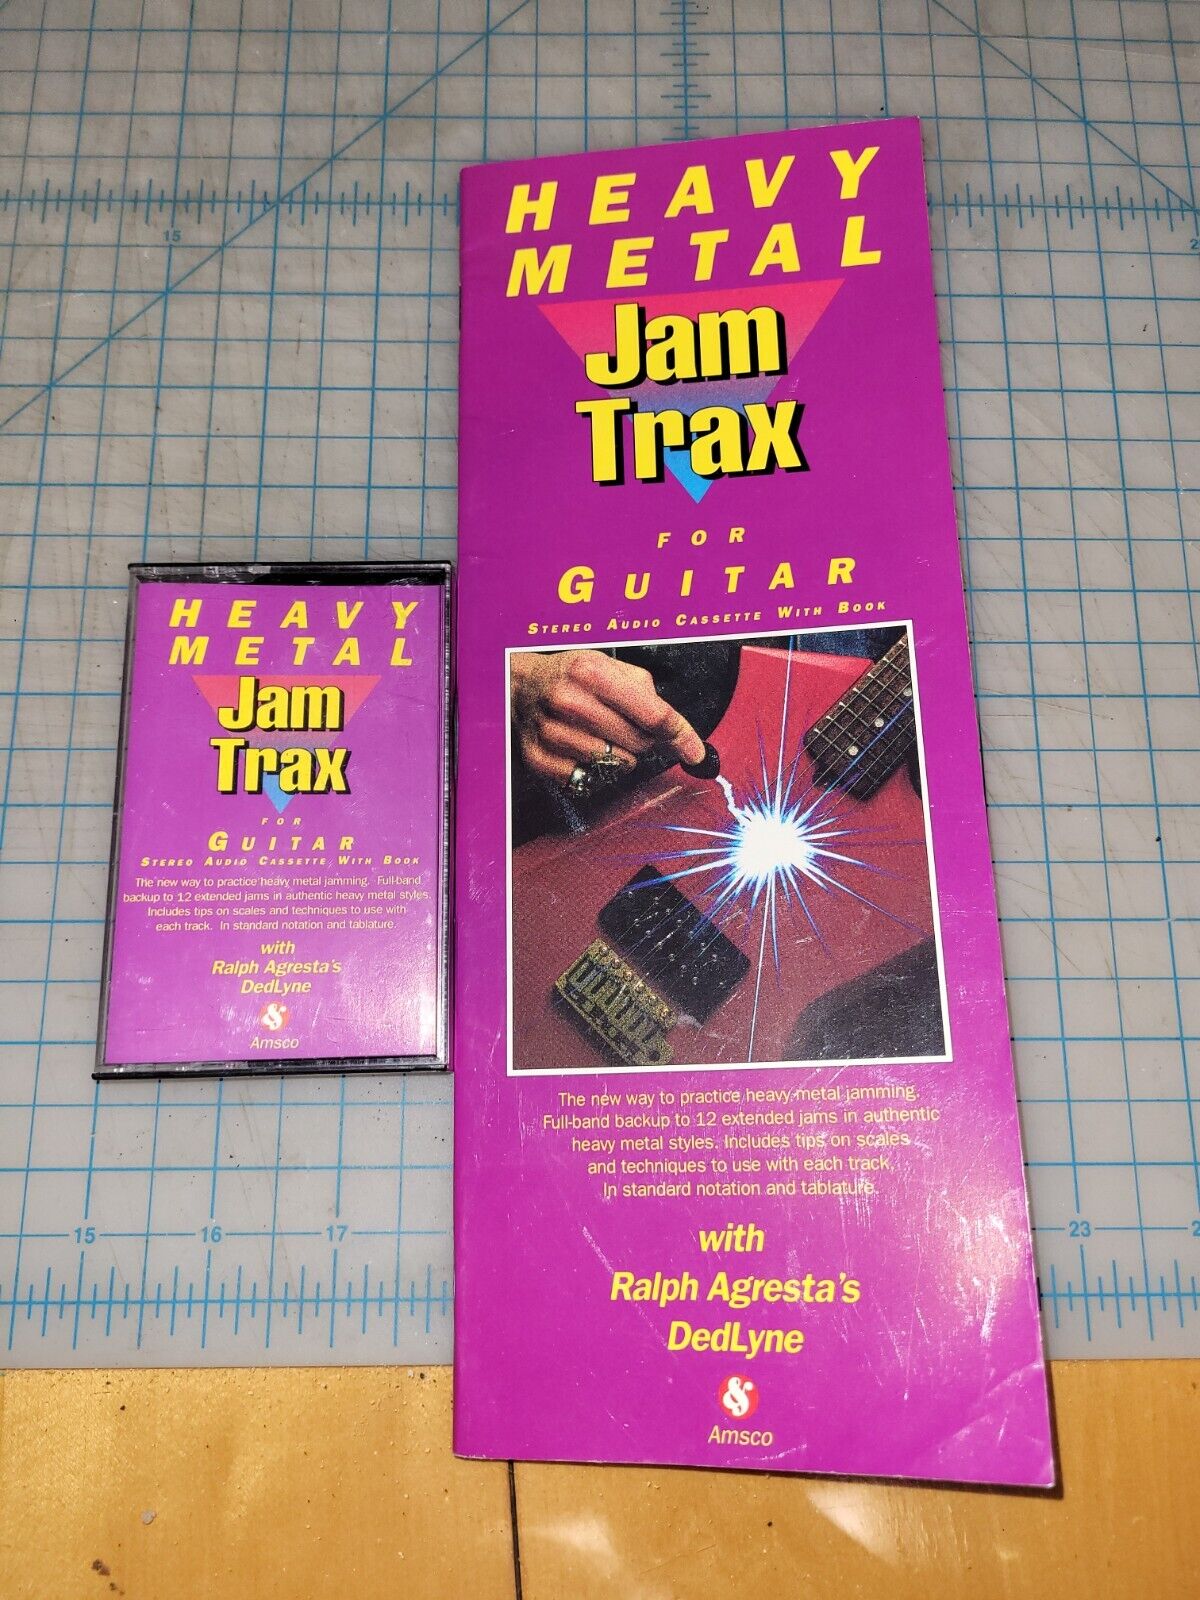 Heavy Metal Jam Trax for Guitar Stereo Audio Cassette W/Book by Ralph Agresta